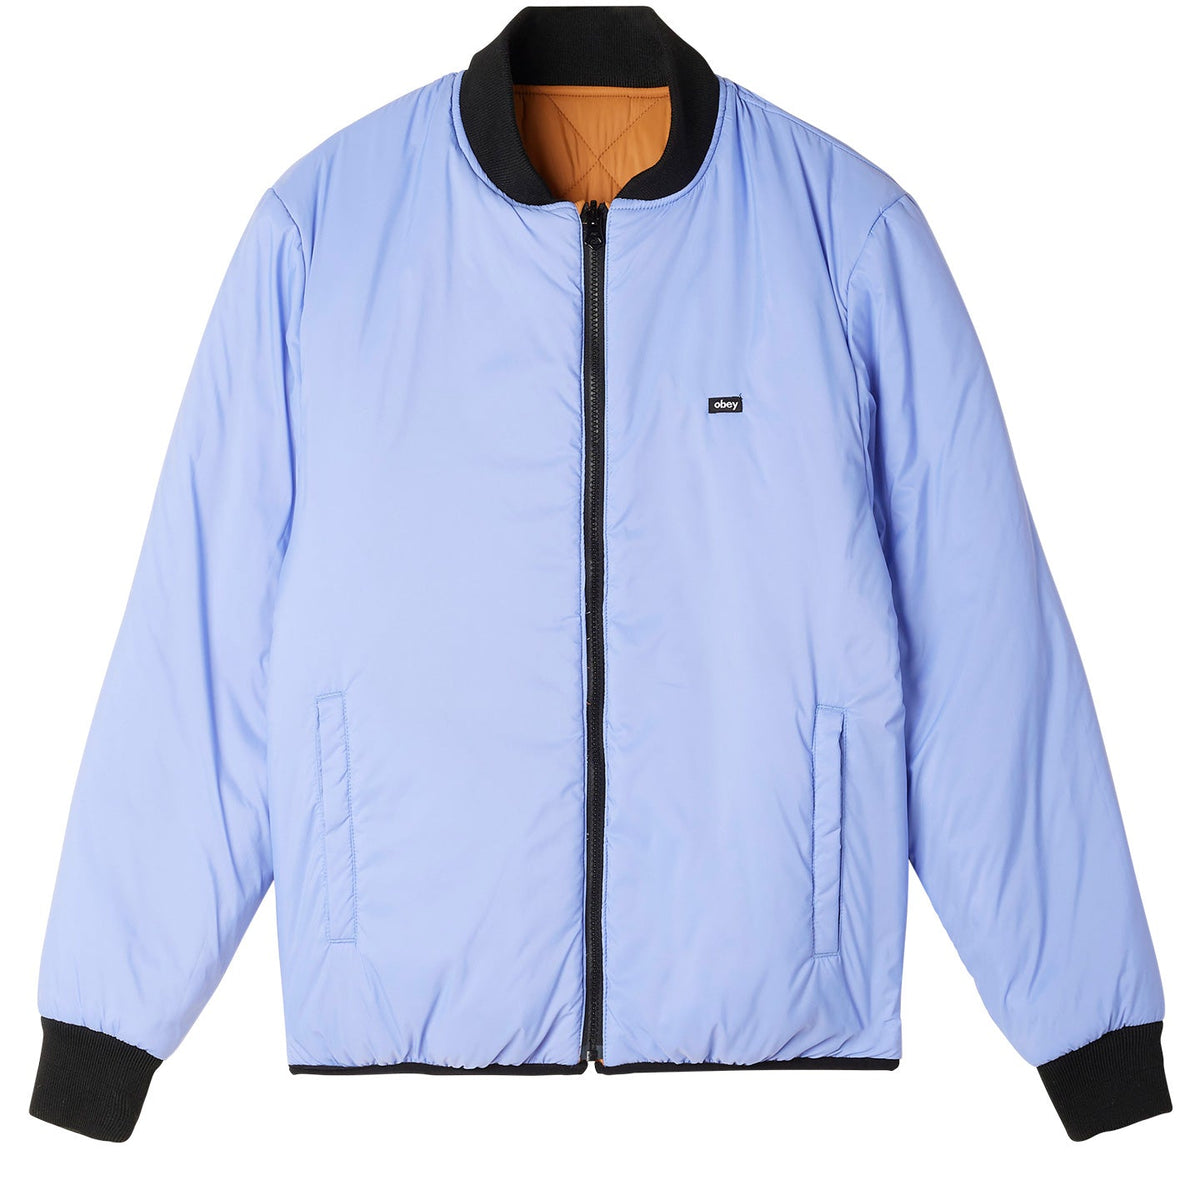 Obey Brux Quilted Jacket